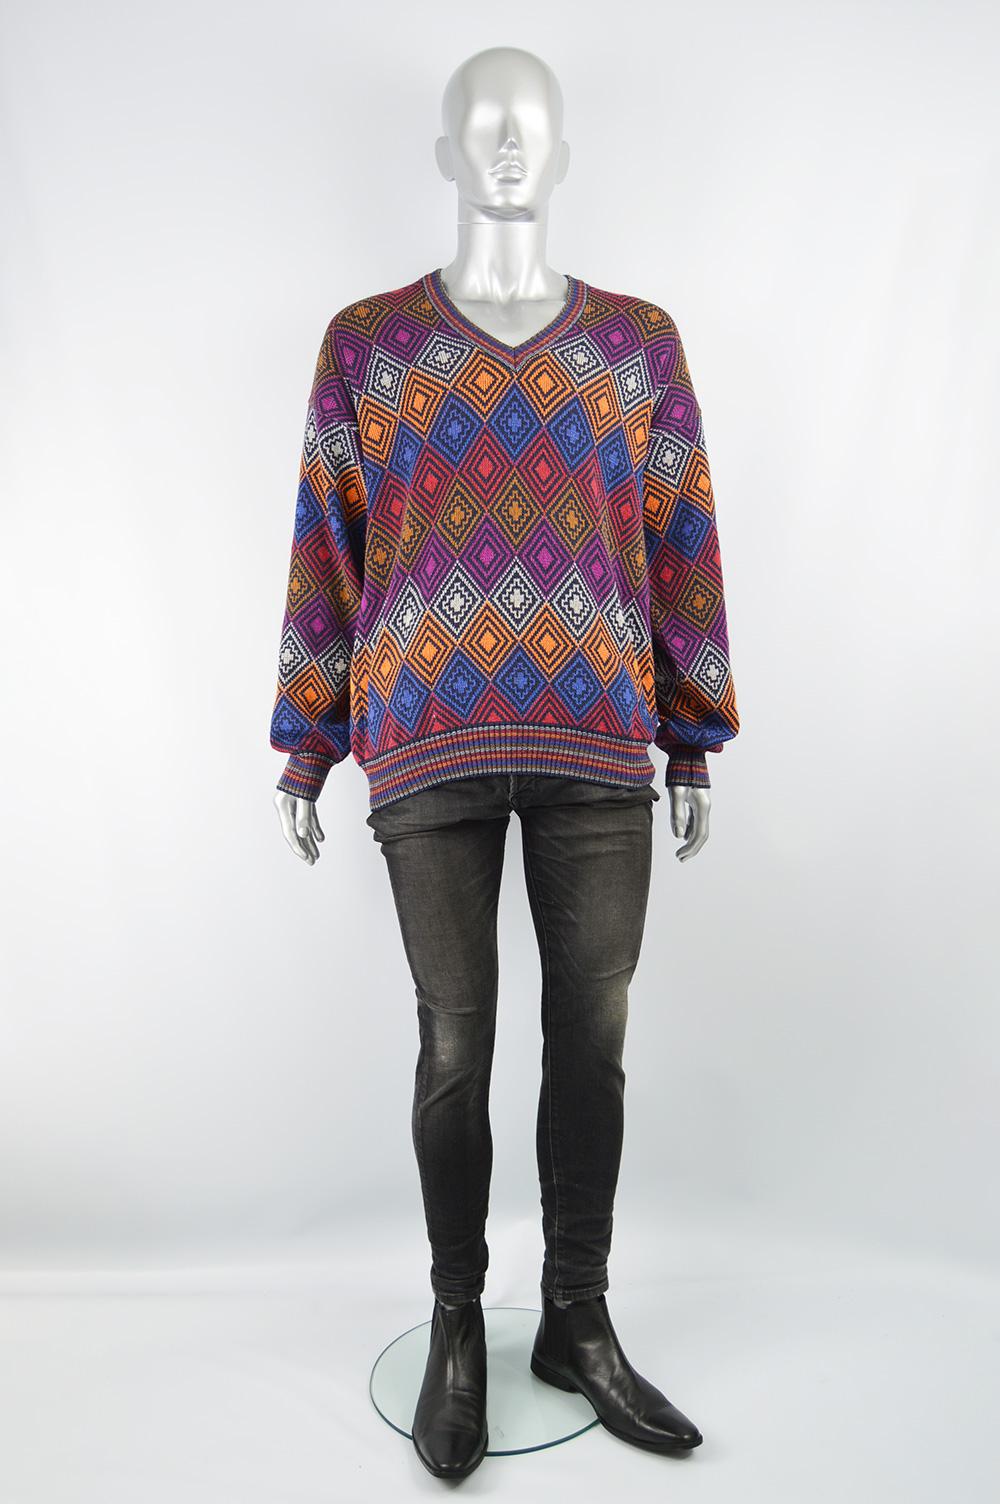 Size: Marked XL but this gives an intentionally loose, relaxed fit. Please check measurements against a similar sweater you already own. 
Chest - 48” / 122cm
Waist - 40” / 101cm
Length (Shoulder to Hem) - 28” / 71cm
Shoulder to Shoulder - 25” /